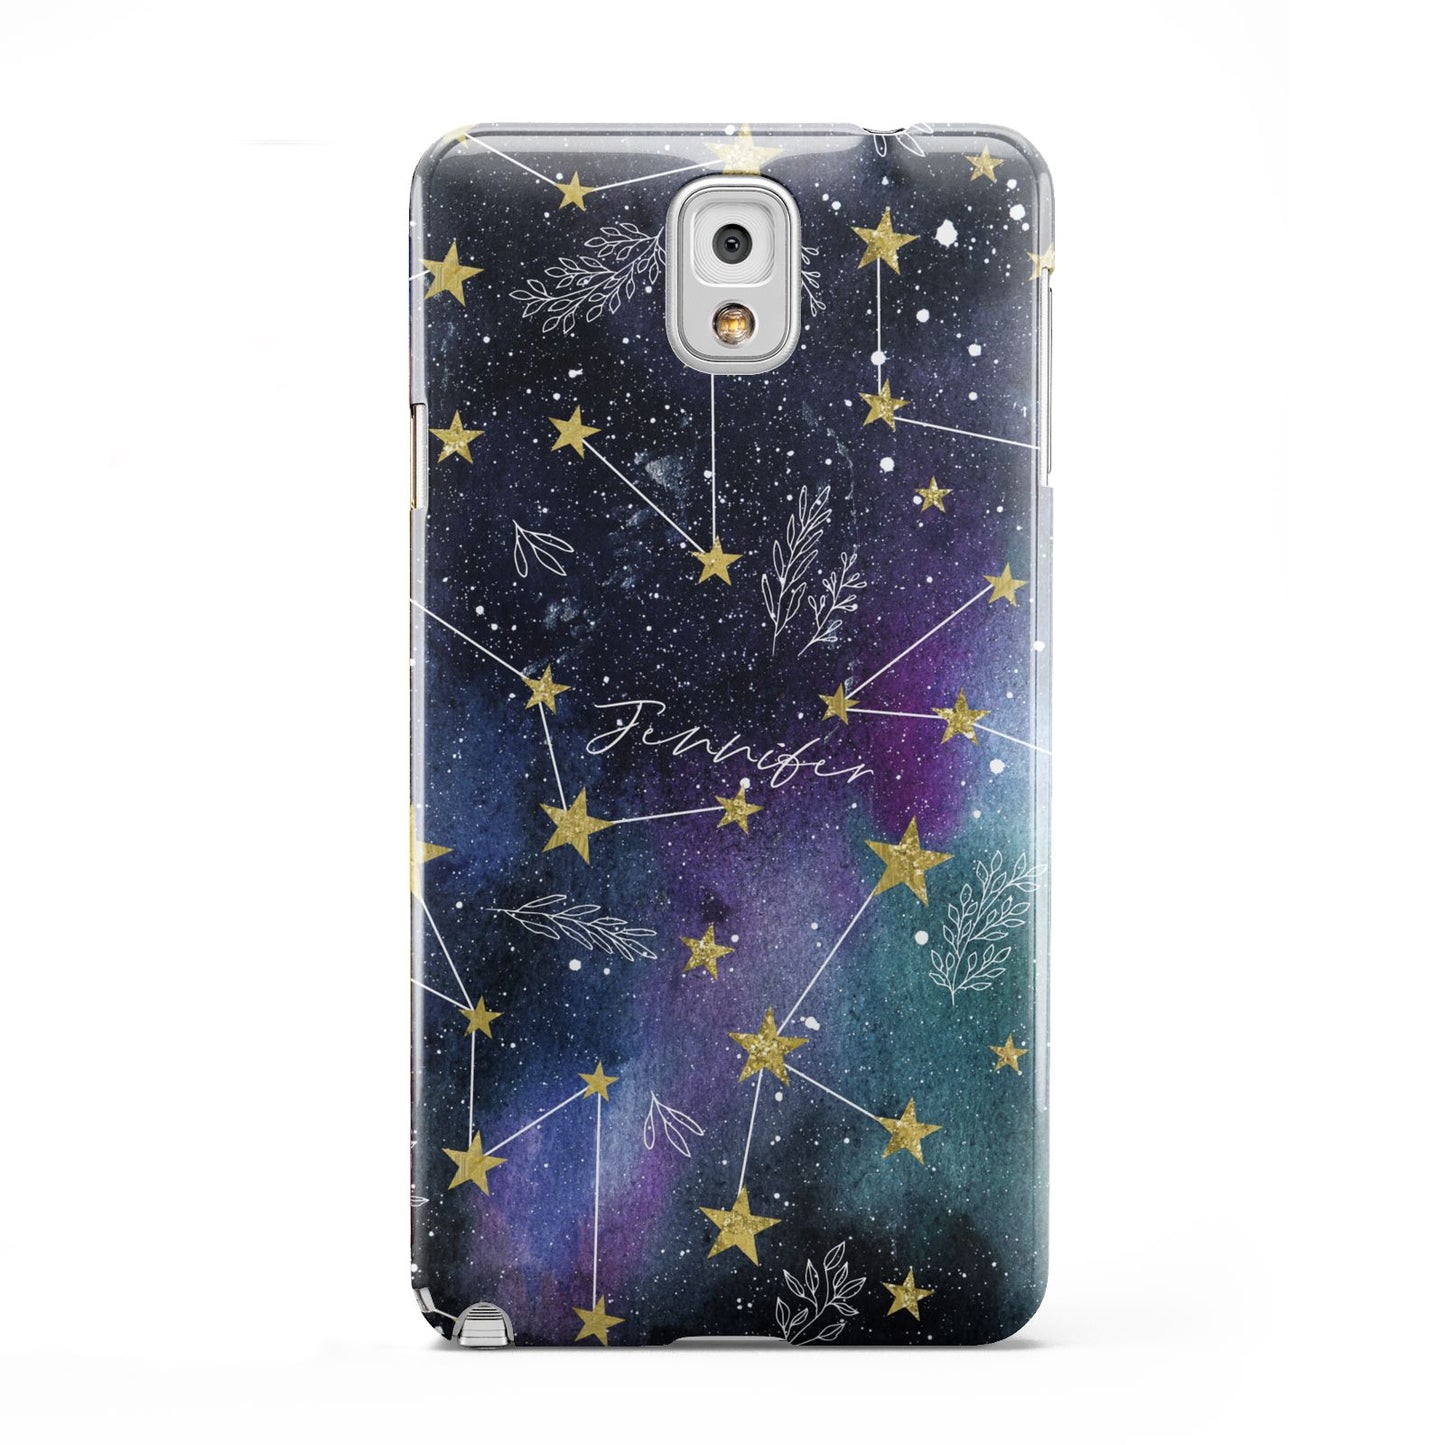 Personalised Constellation Samsung Galaxy Note 3 Case